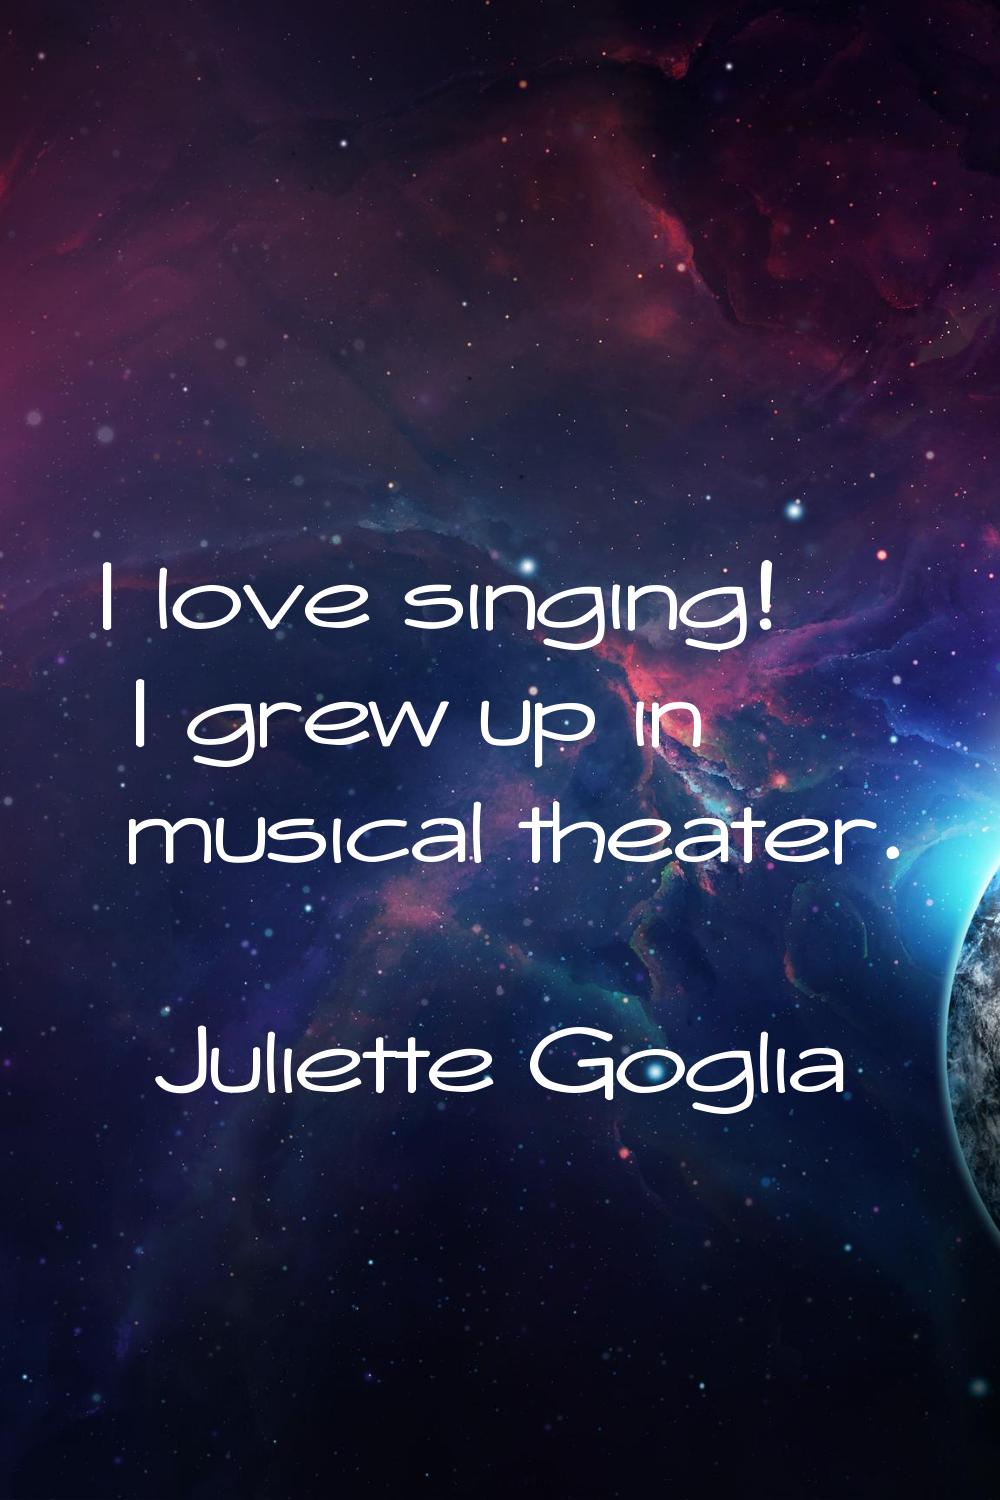 I love singing! I grew up in musical theater.